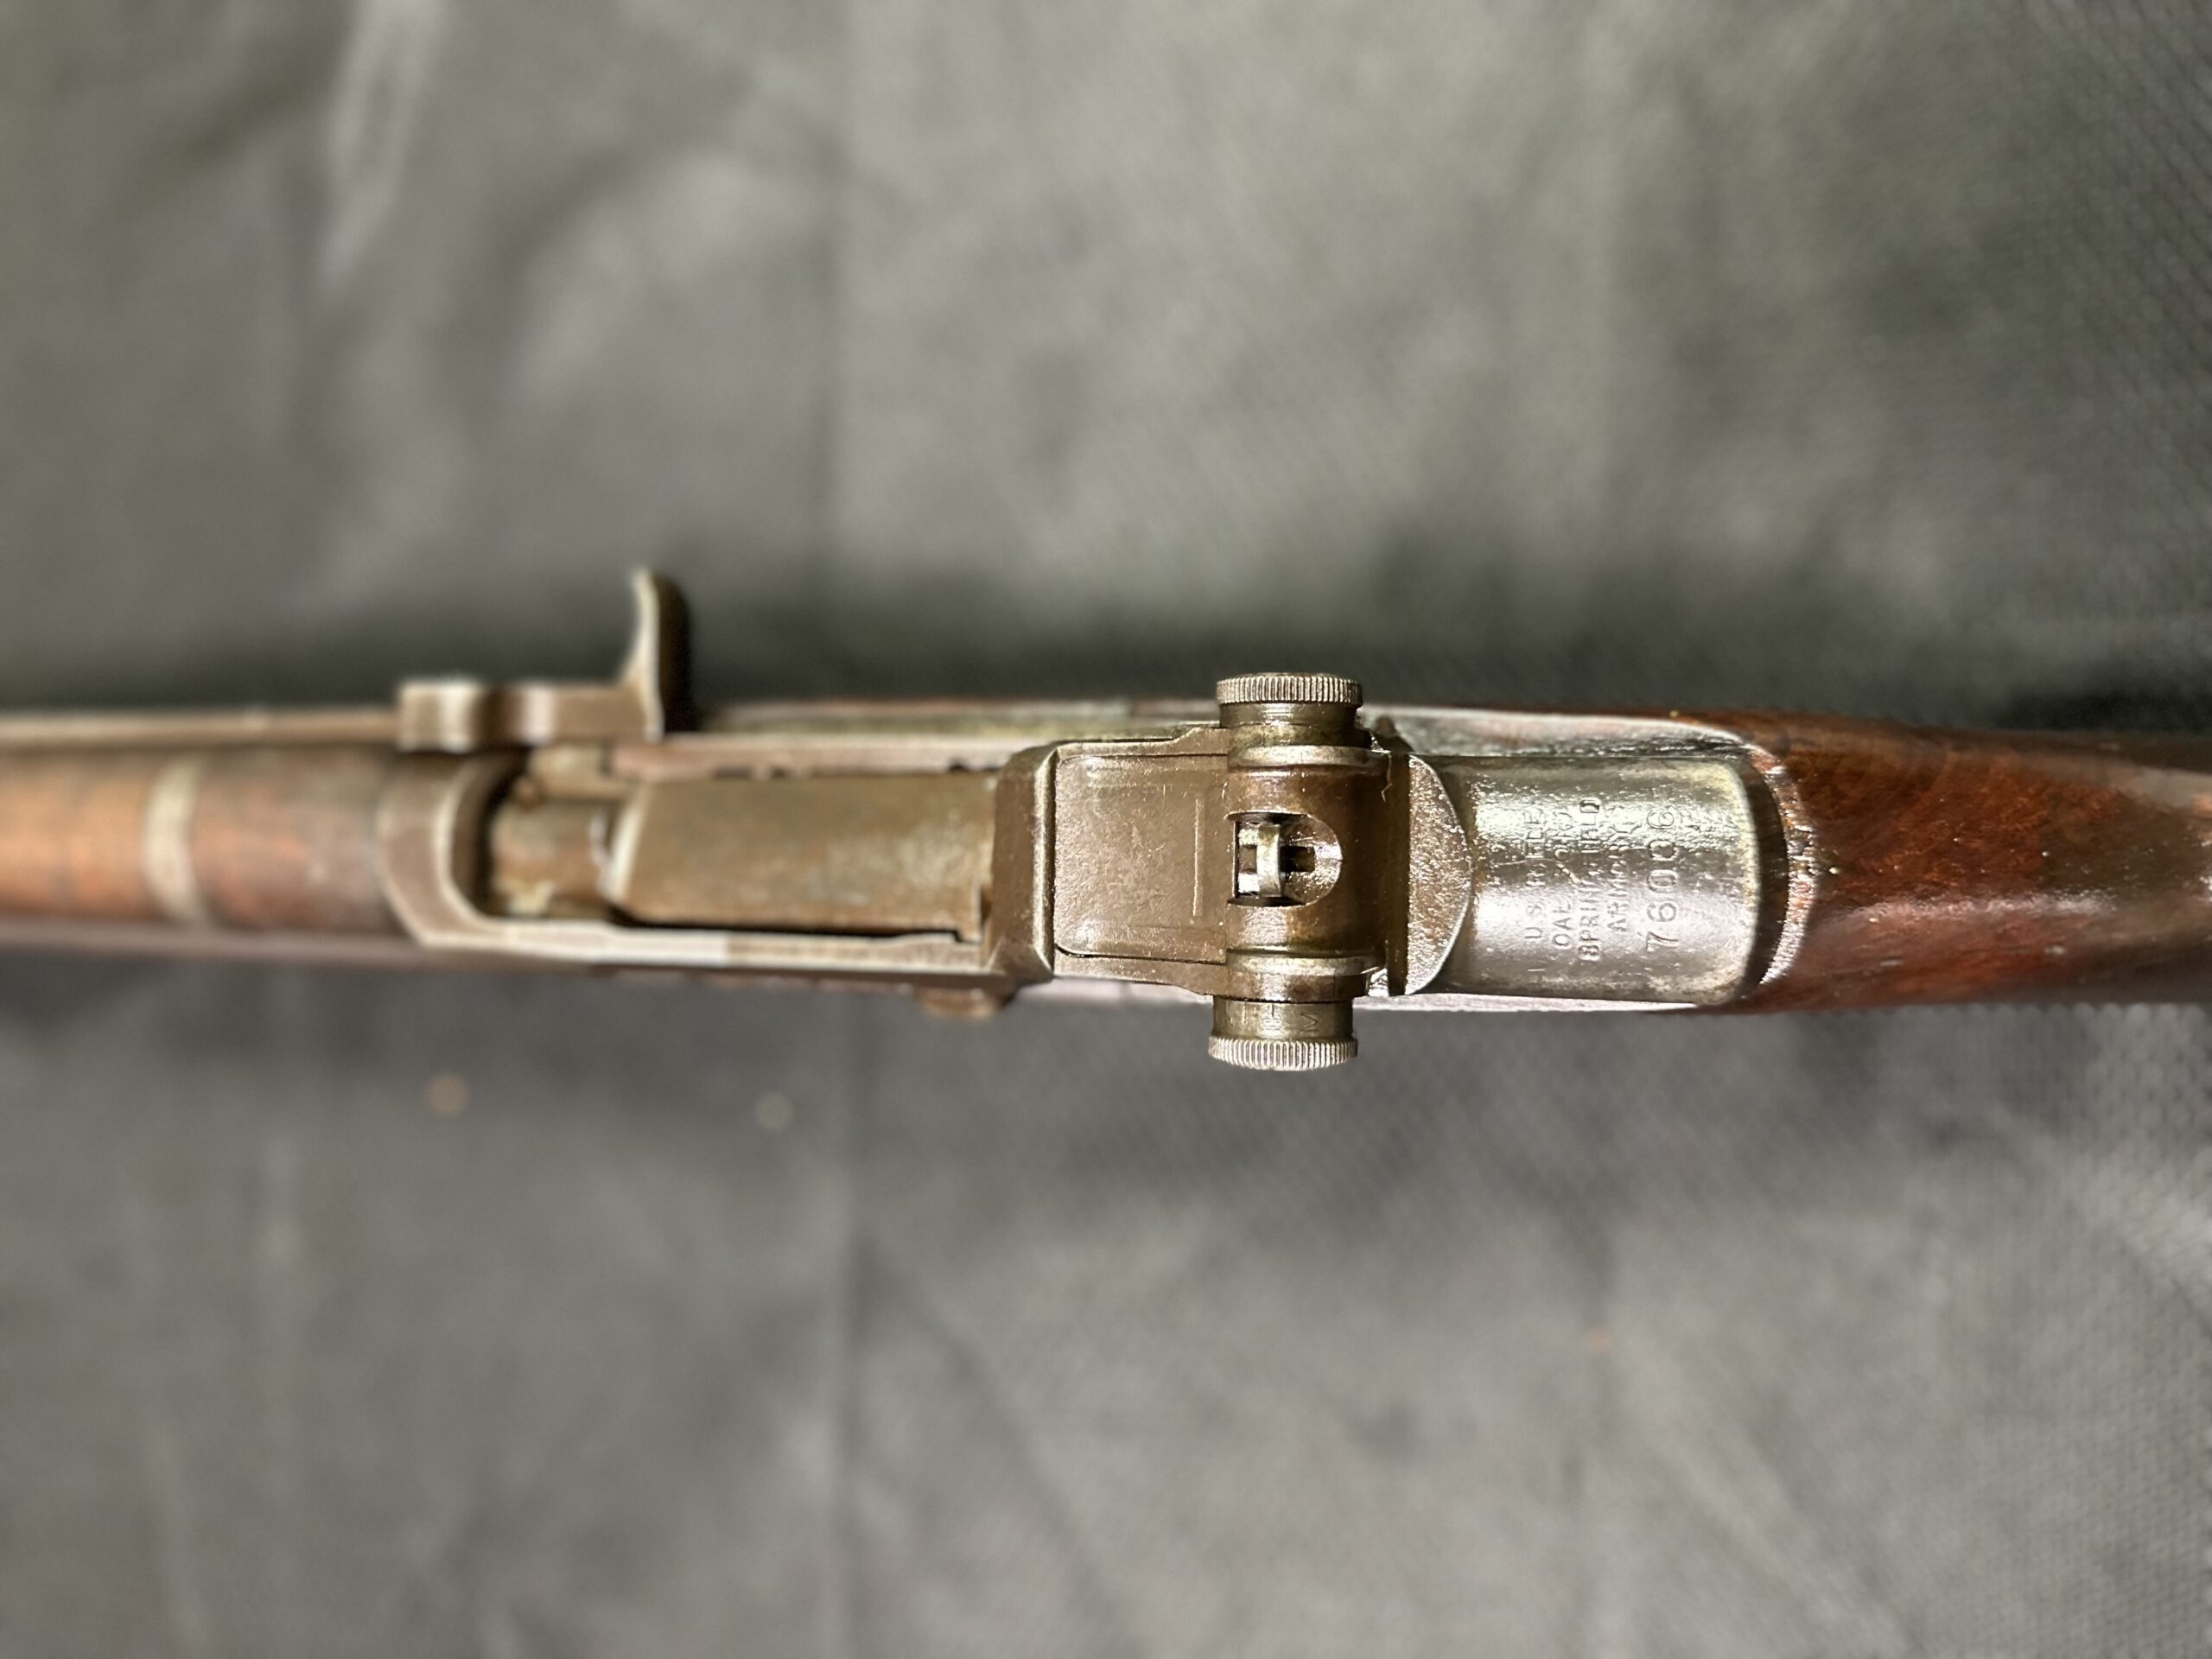 Springfield Armory M1 Garand .30-06 caliber rifle in the 6 million serial  number range. Mint barrel dated August 1956 and marked (r11741)